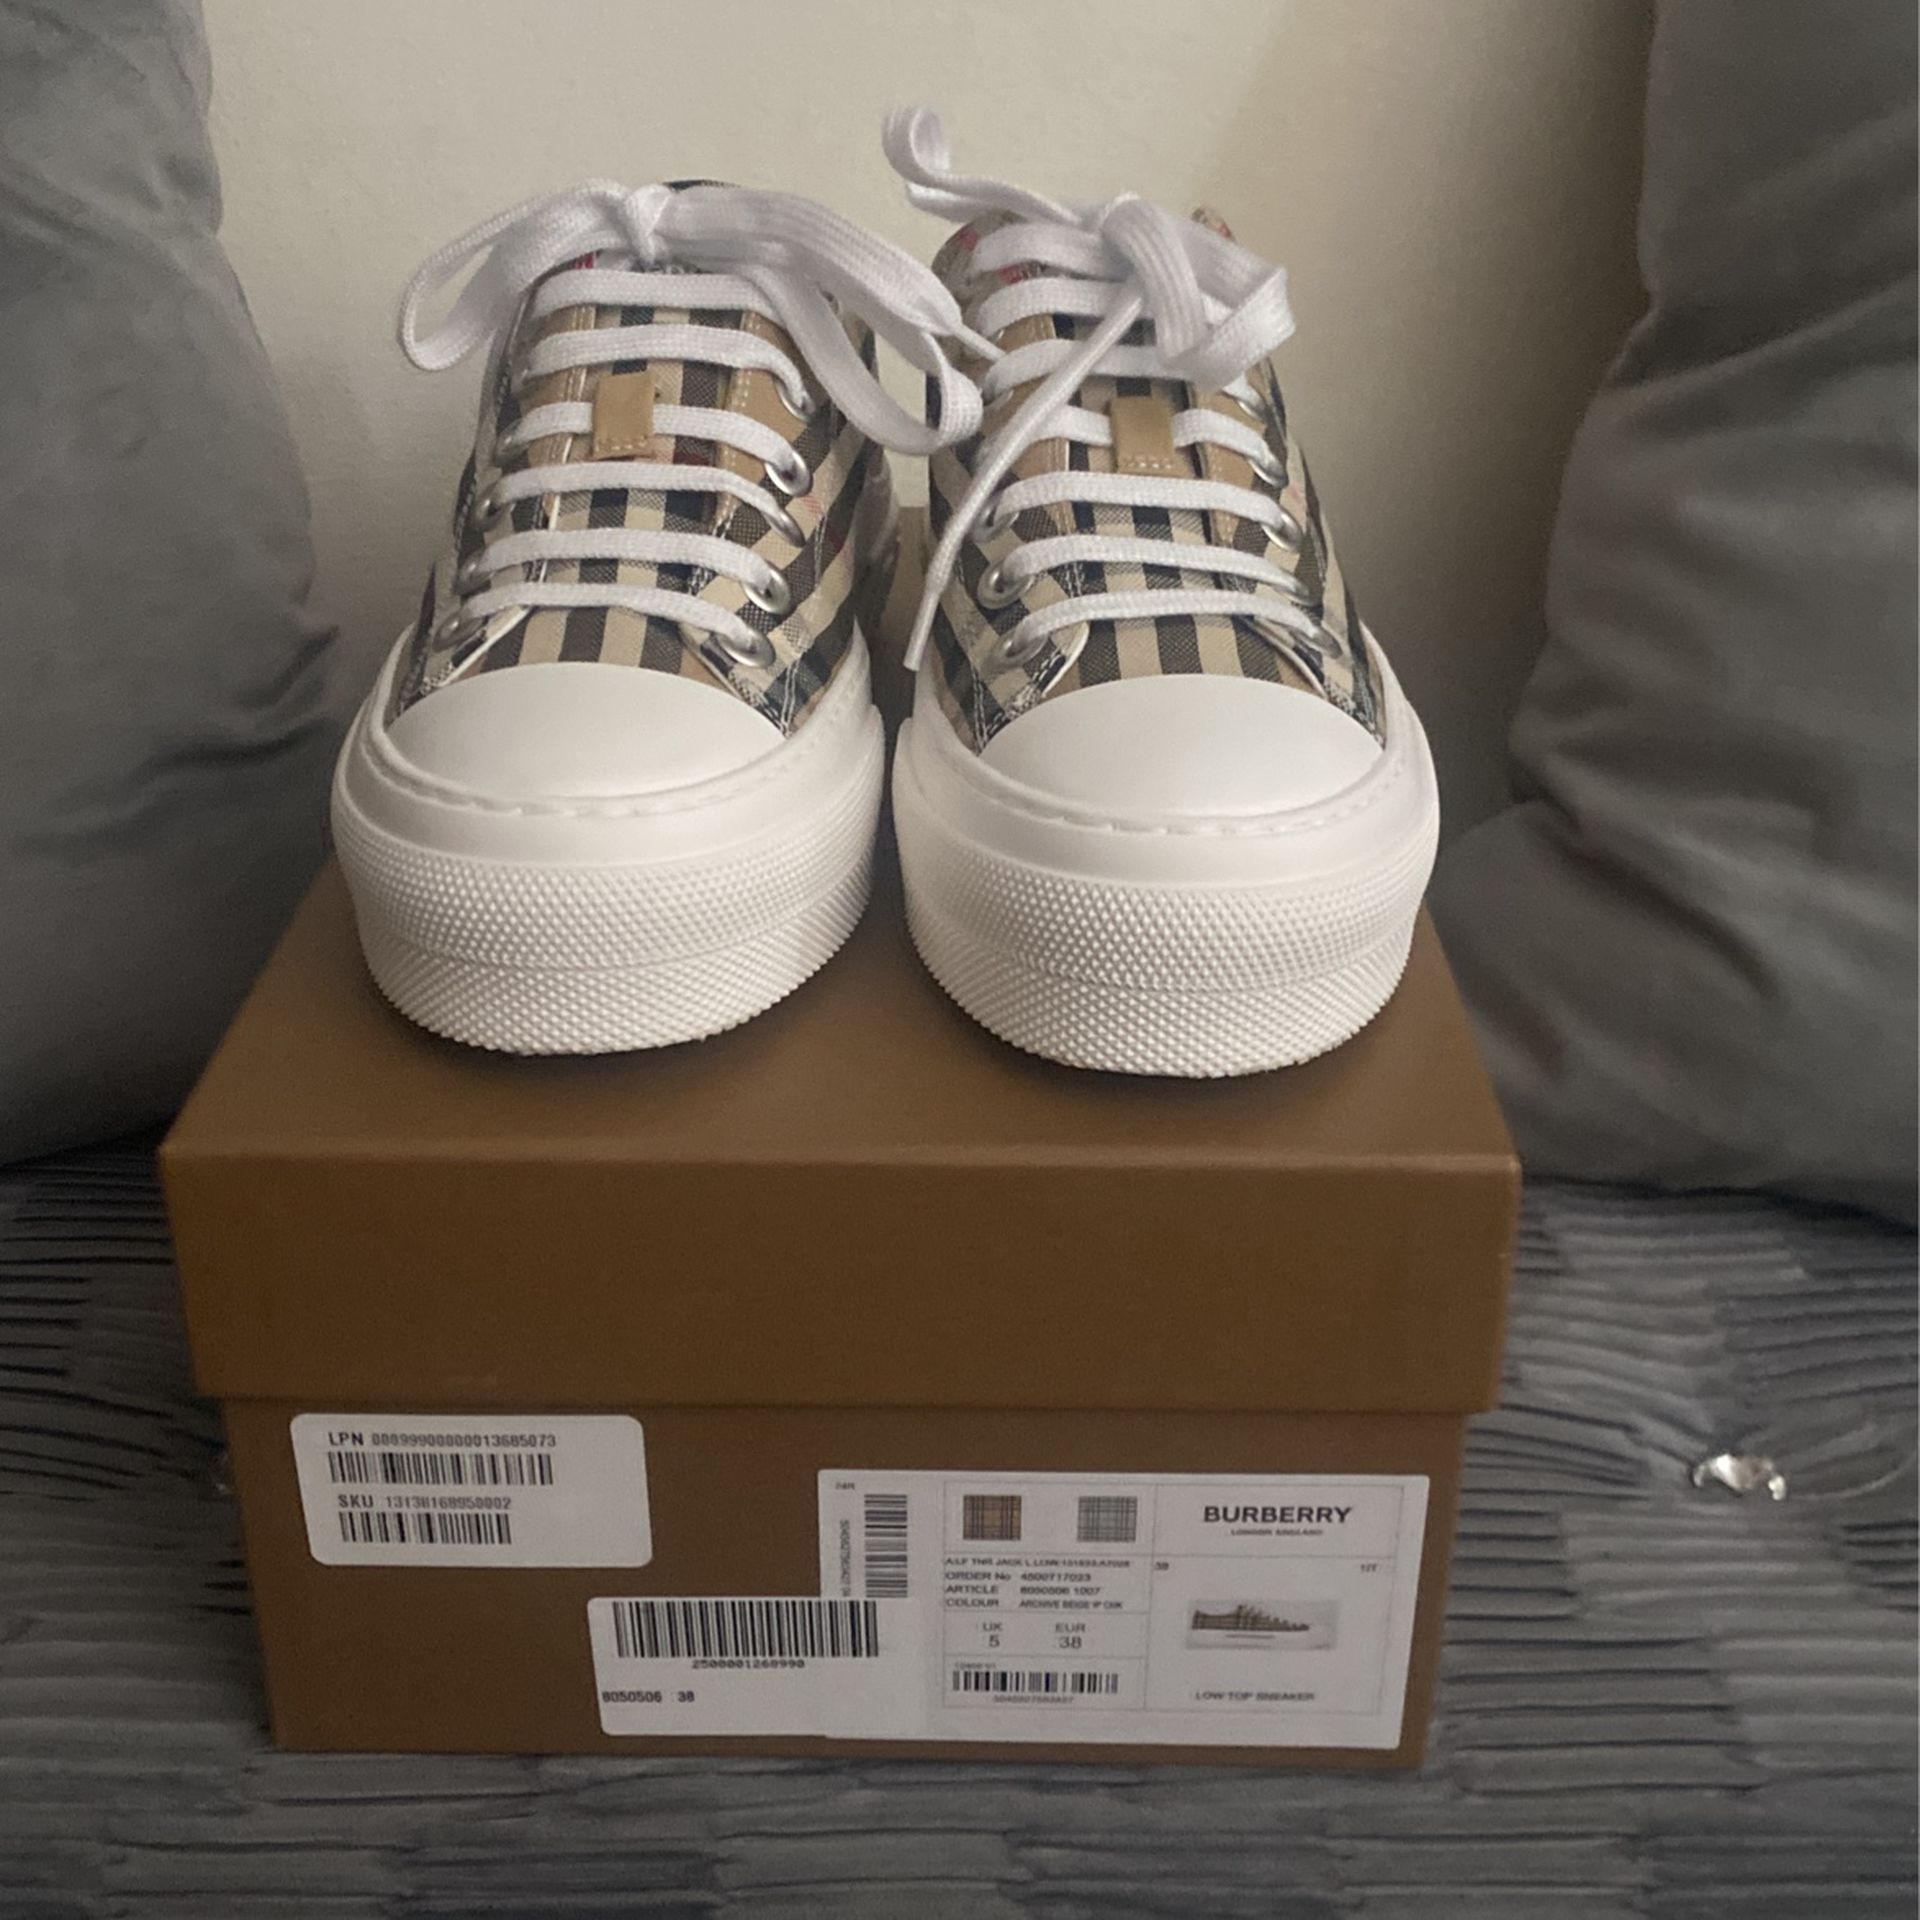 BURBERRY  LOW TOP  SNEAKER BRAND NEW SIZE 38……..$300